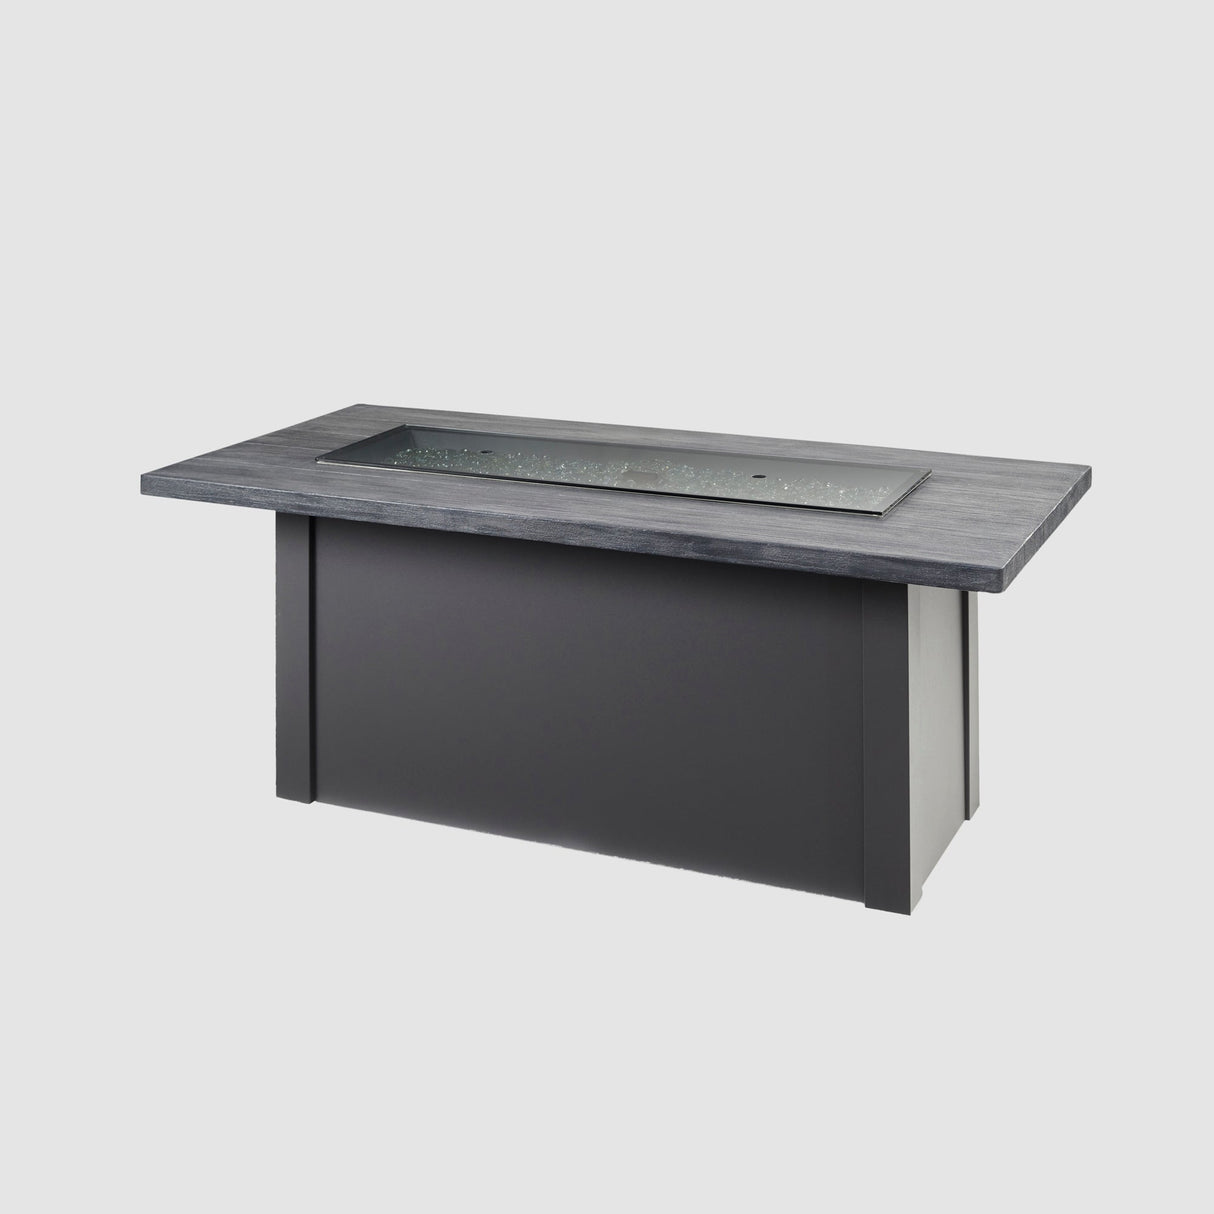 A cover placed on the burner of a Havenwood Linear Gas Fire Pit Table with a Carbon Grey top and Graphite Grey base